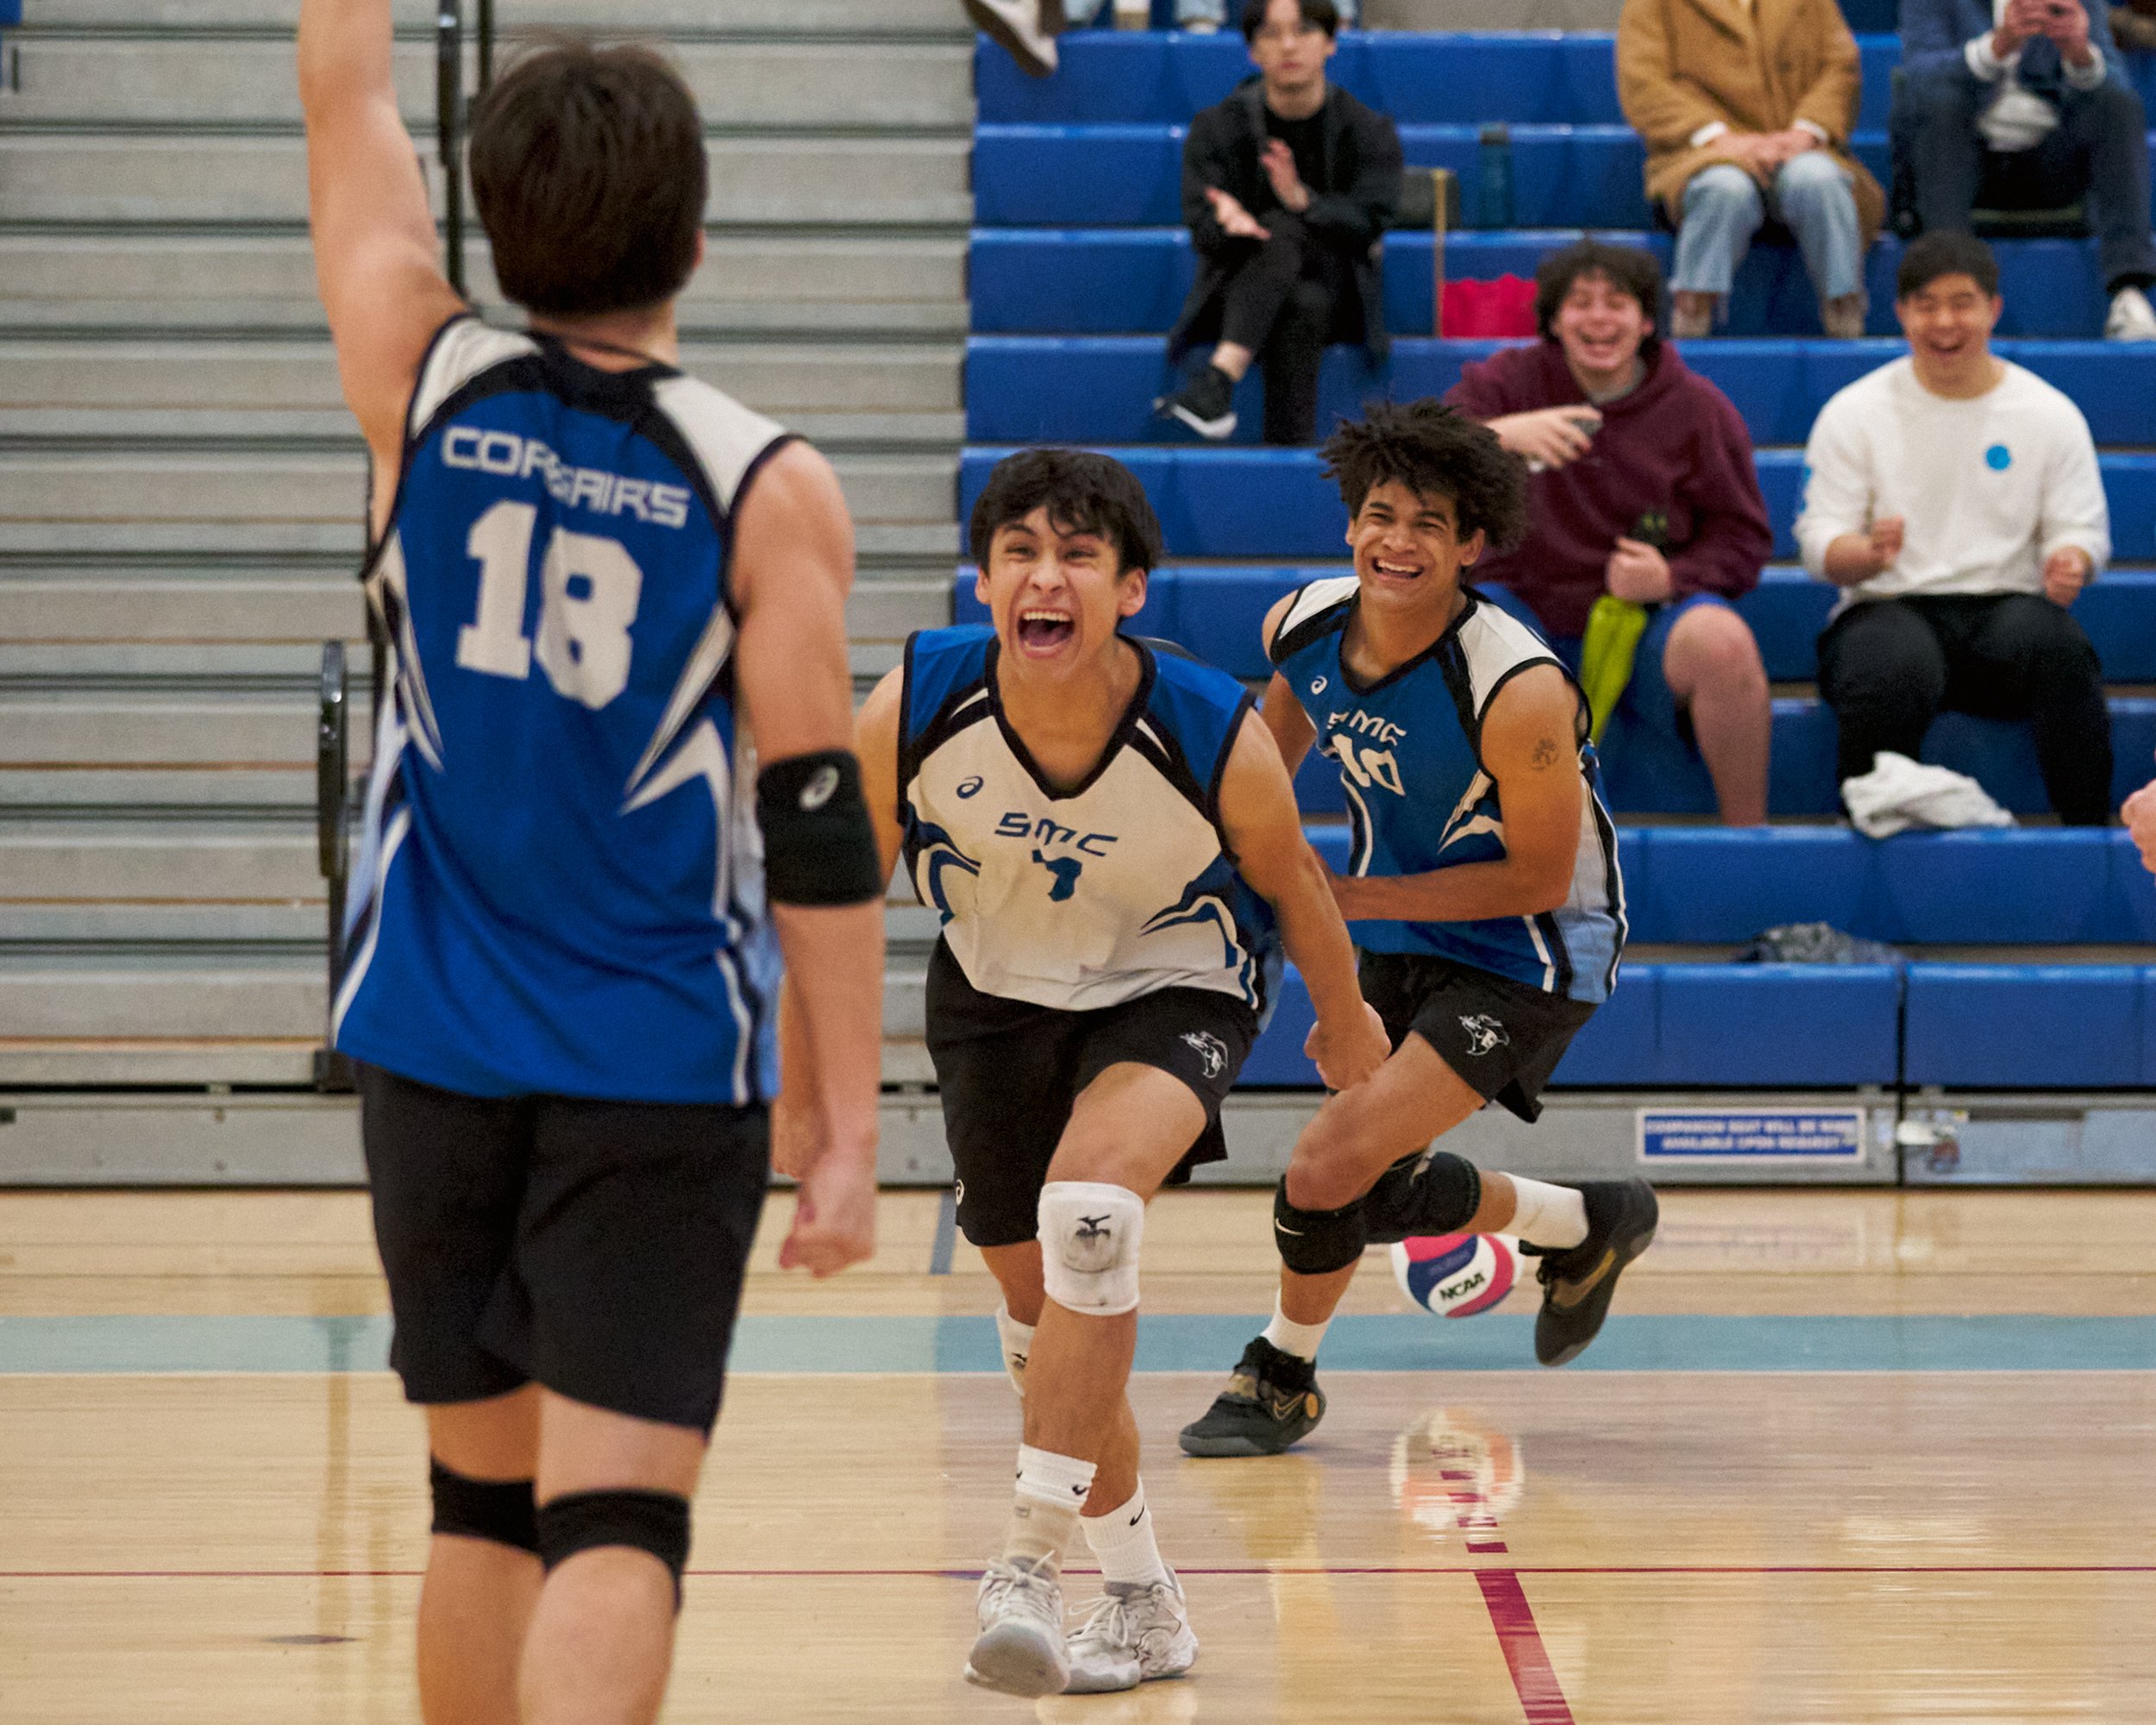  Santa Monica College Corsairs' Enkhtur Tserendavaa, Javier Castillo, and Nate Davis celebrate after scoring during the men's volleyball match against the Irvine Valley College Lasers on Friday, Feb. 24, 2023, at Corsair Gym in Santa Monica, Calif. T